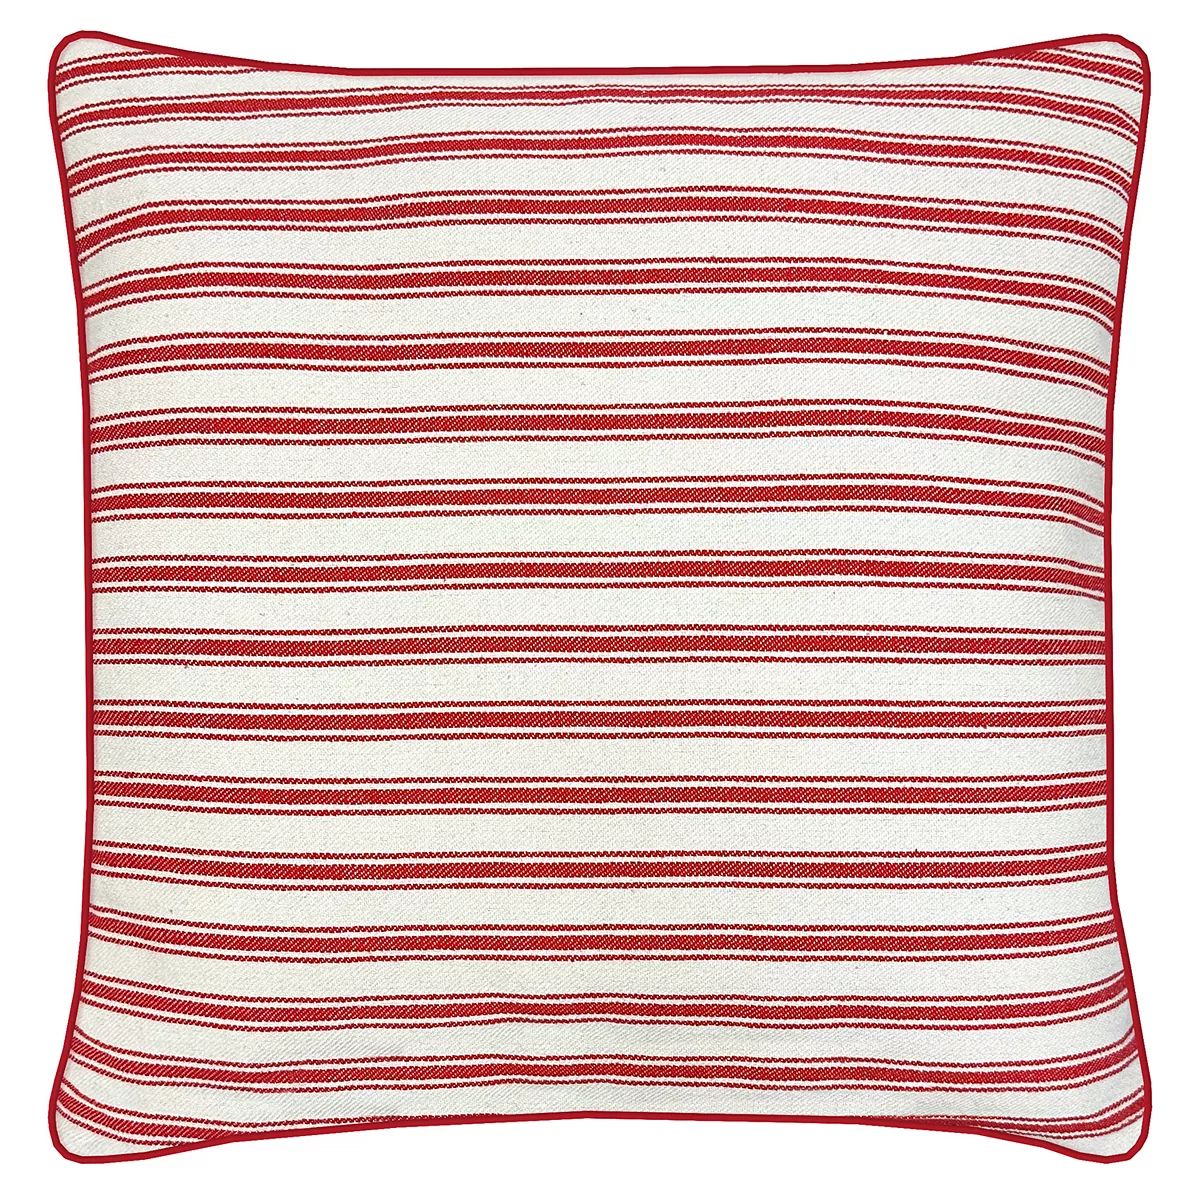 Celebrate Together™ Americana Red Woven Micro Stripe Pillow | Kohl's